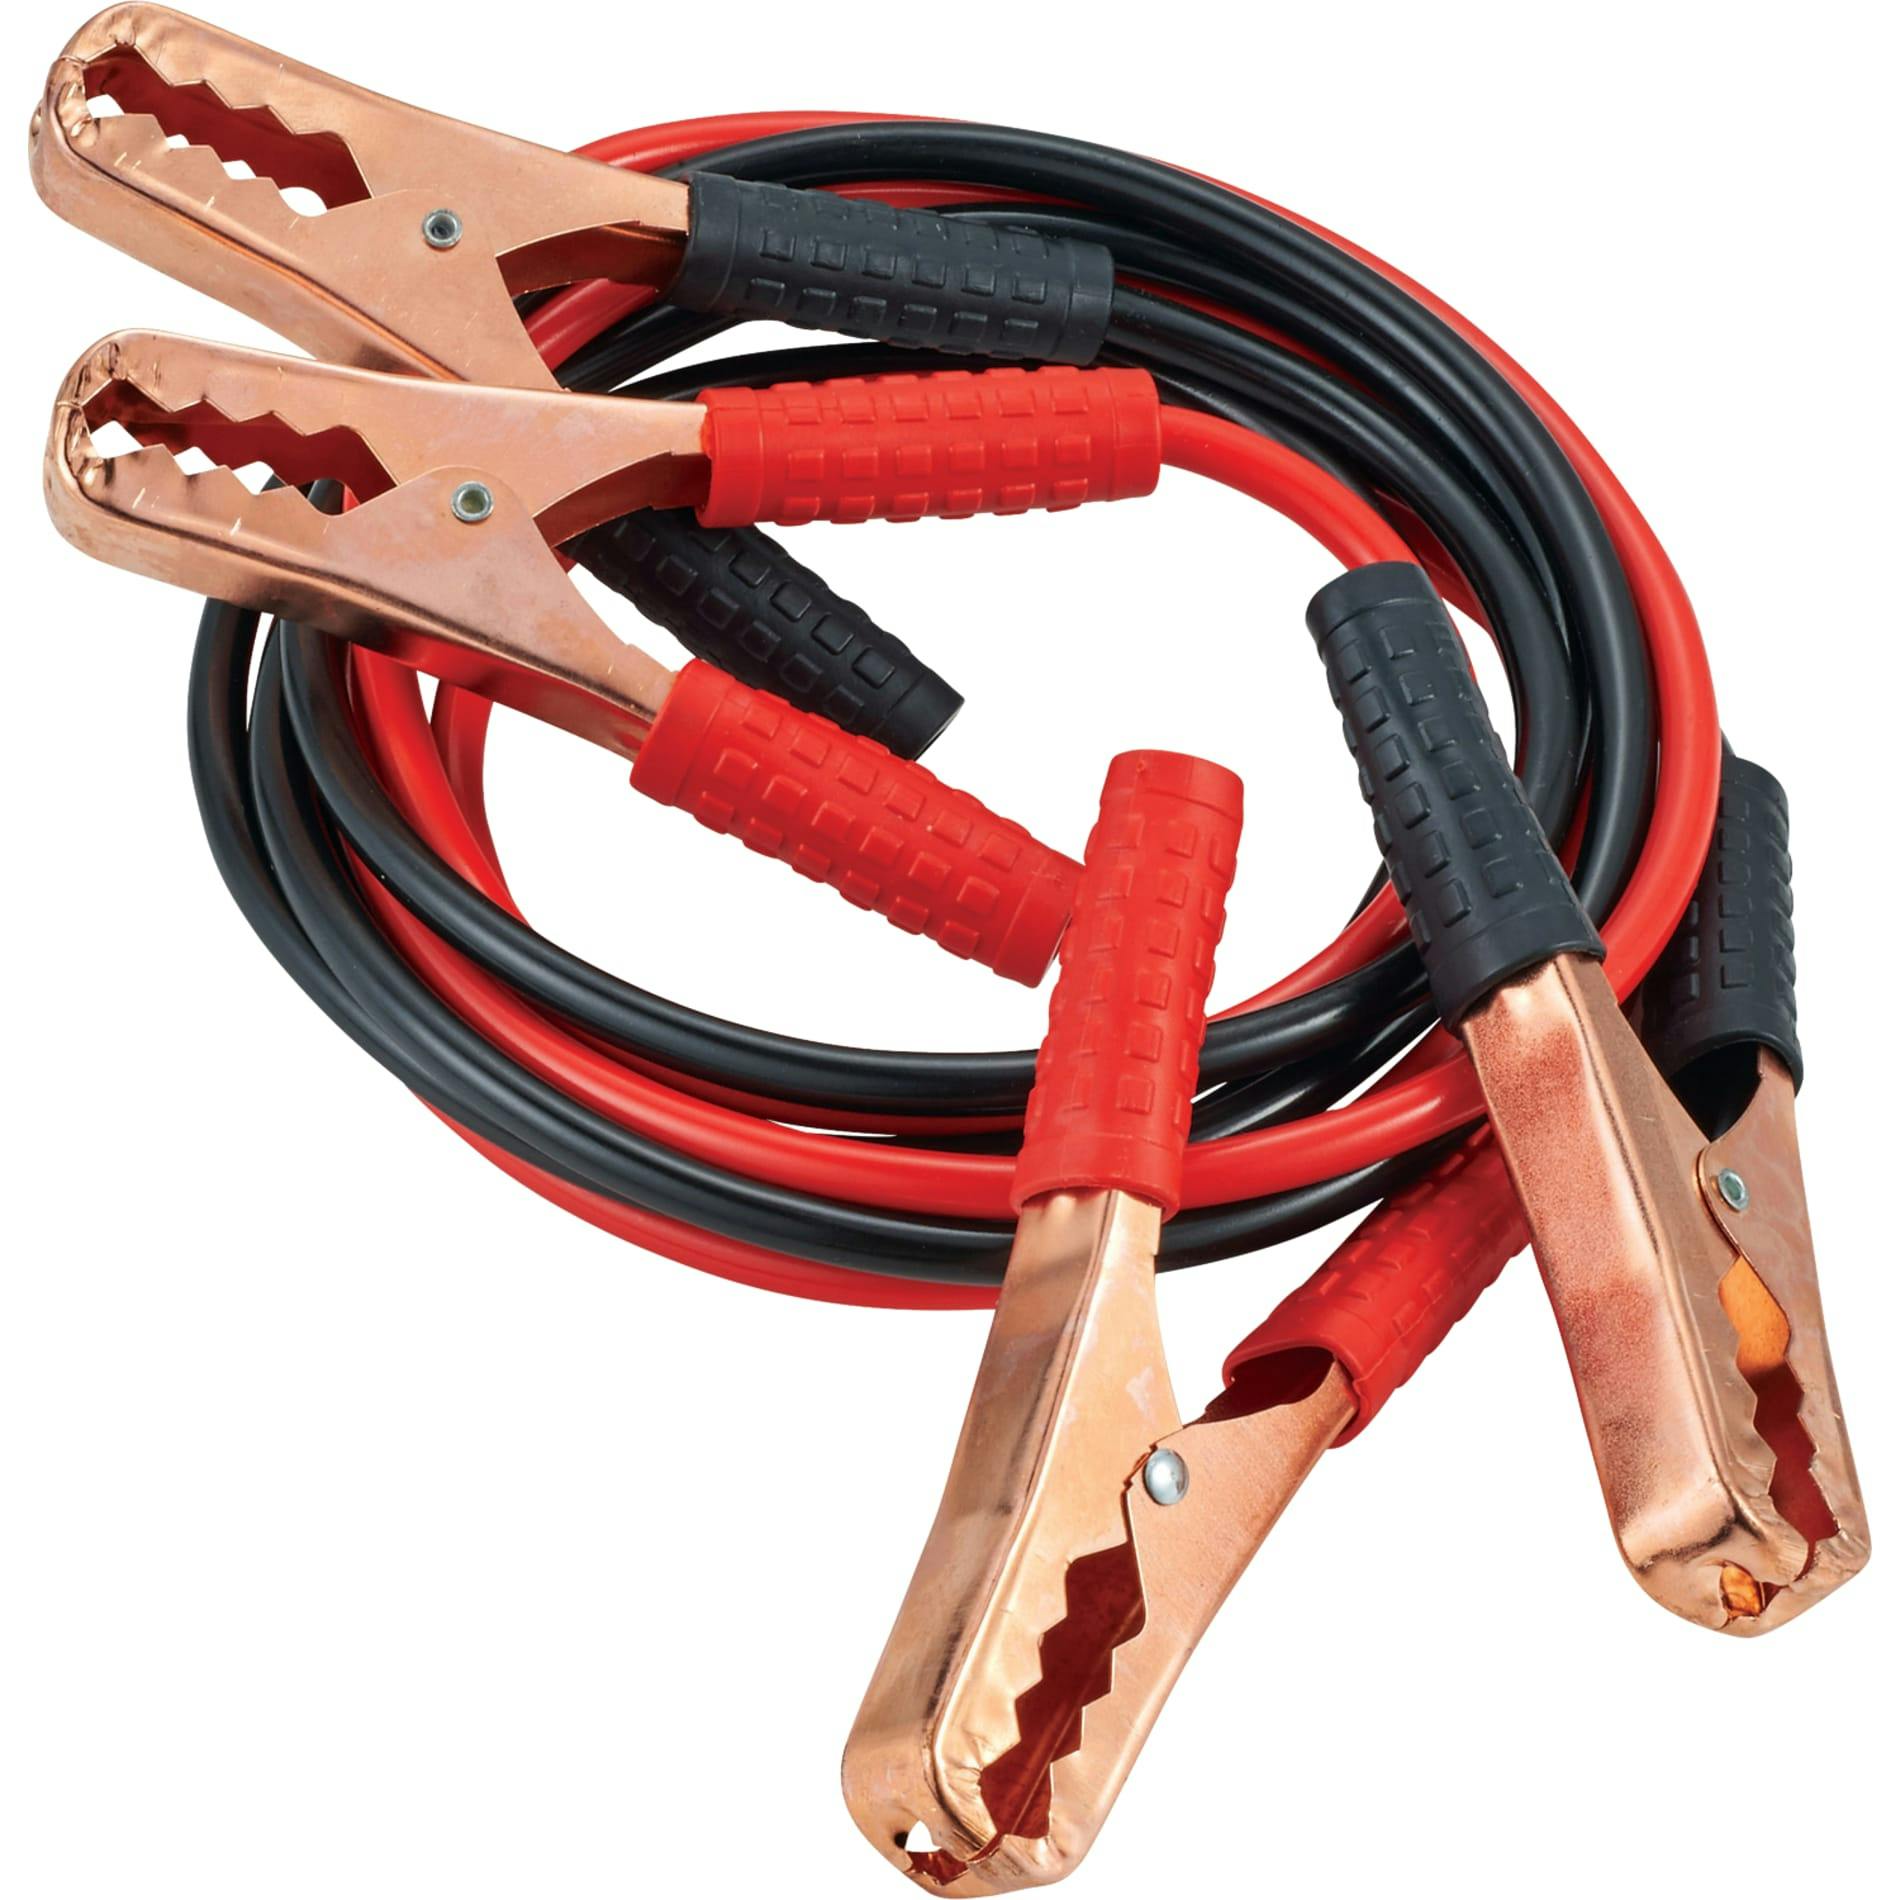 Highway Jumper Cable and Tools Set - additional Image 3